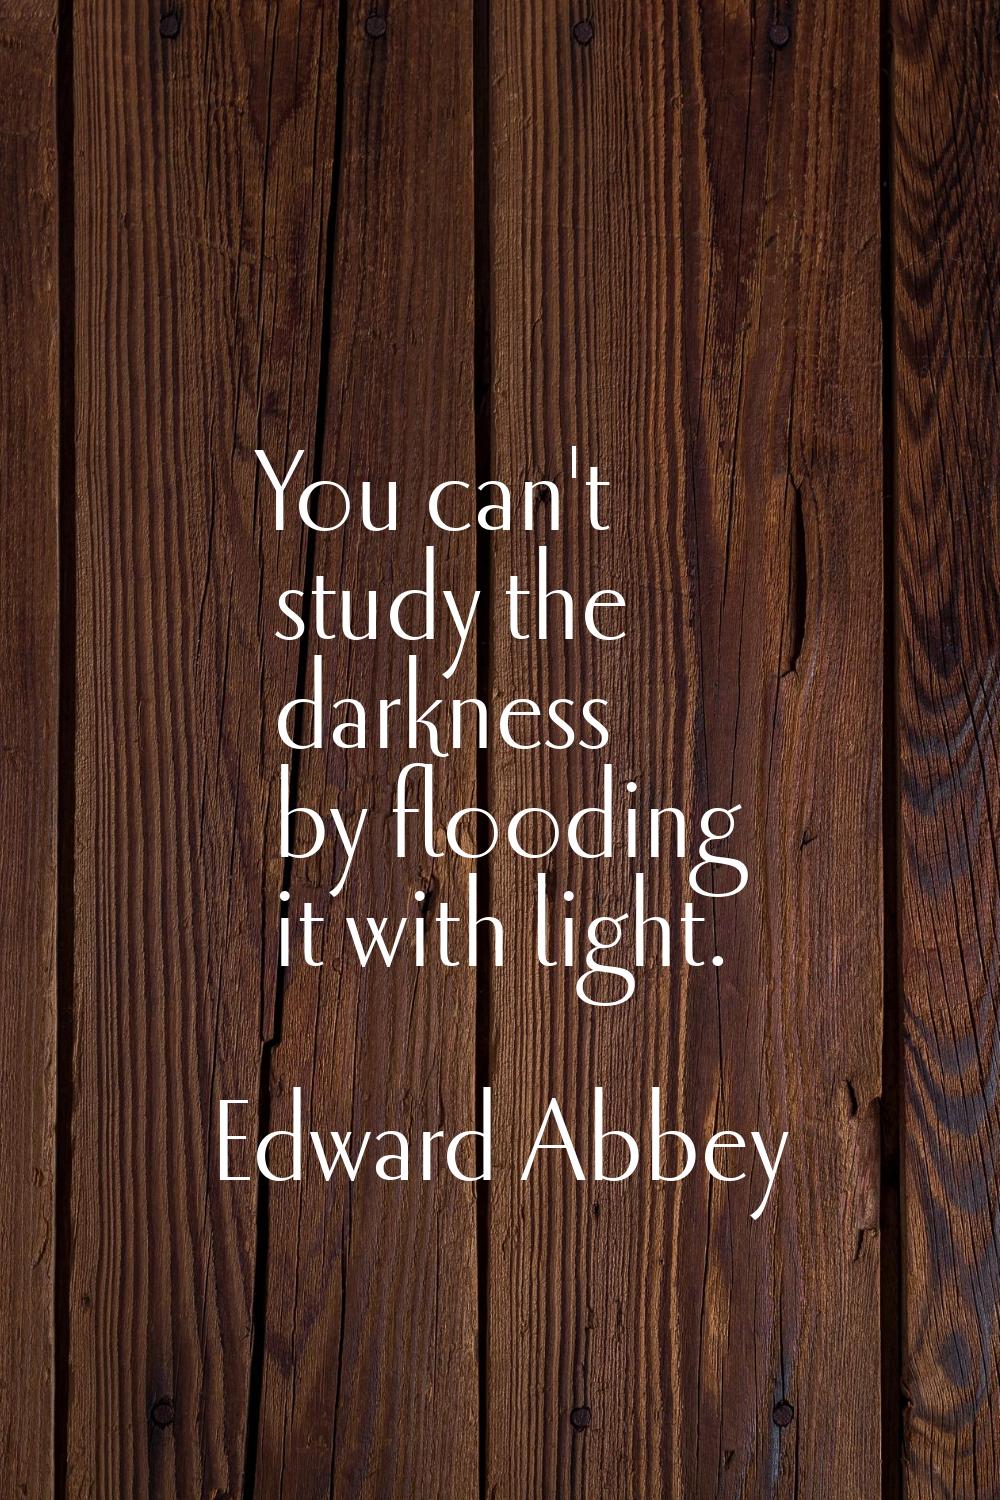 You can't study the darkness by flooding it with light.